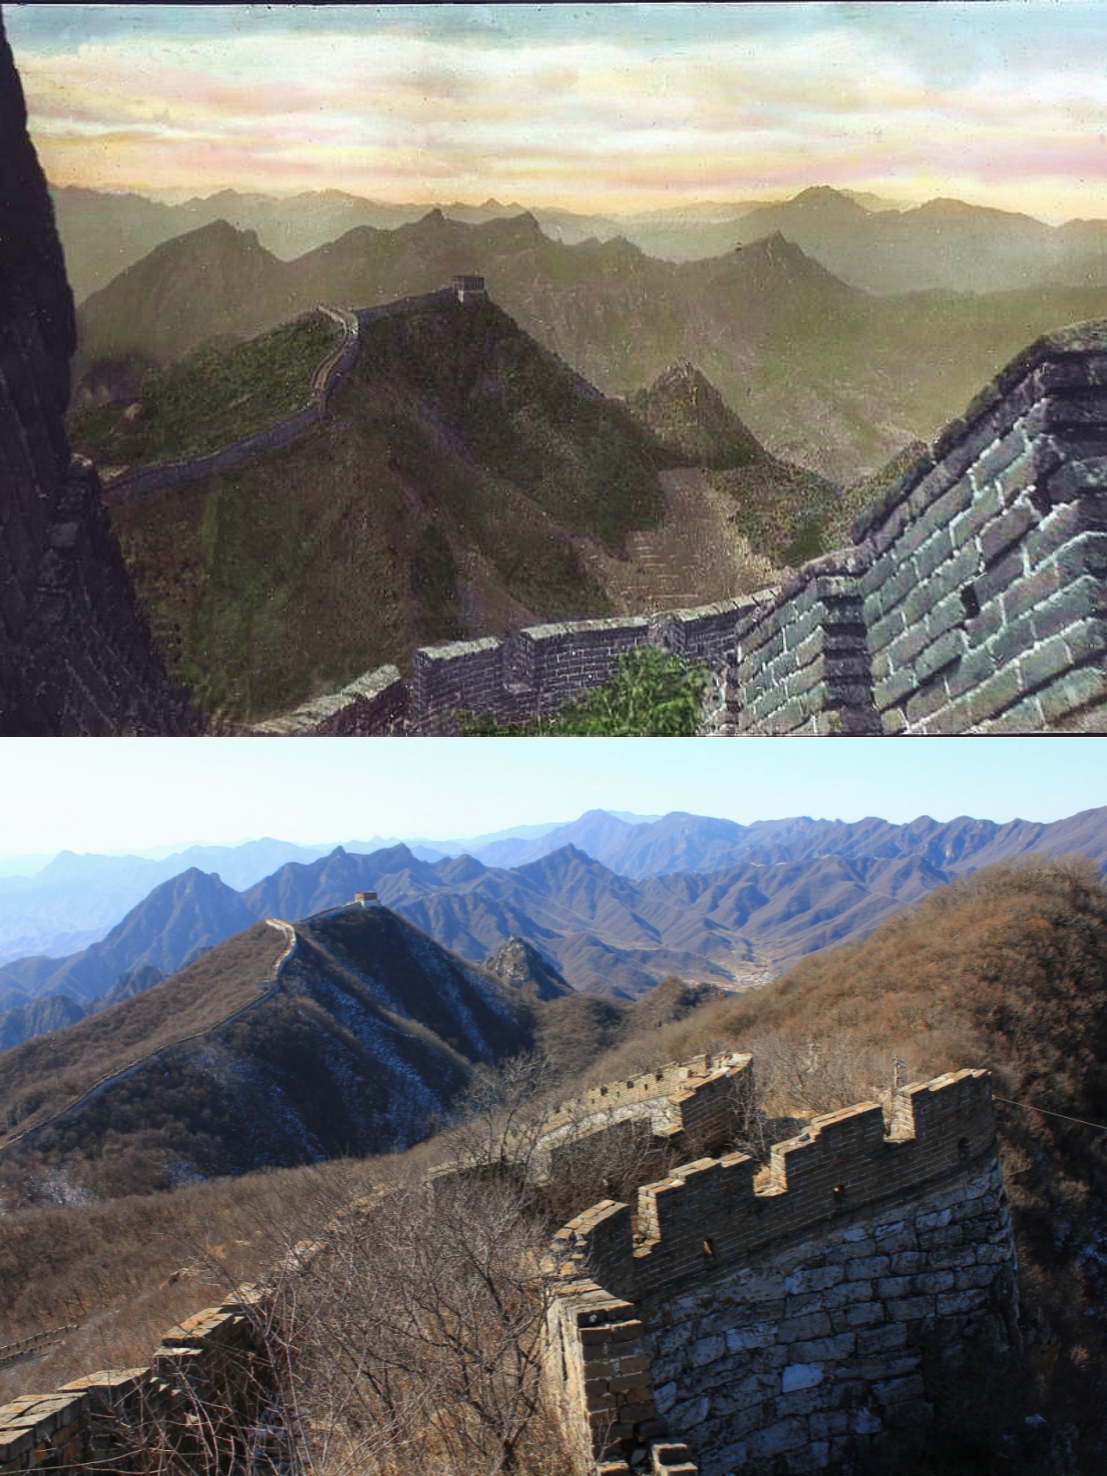 Photographs in The Great Wall of China